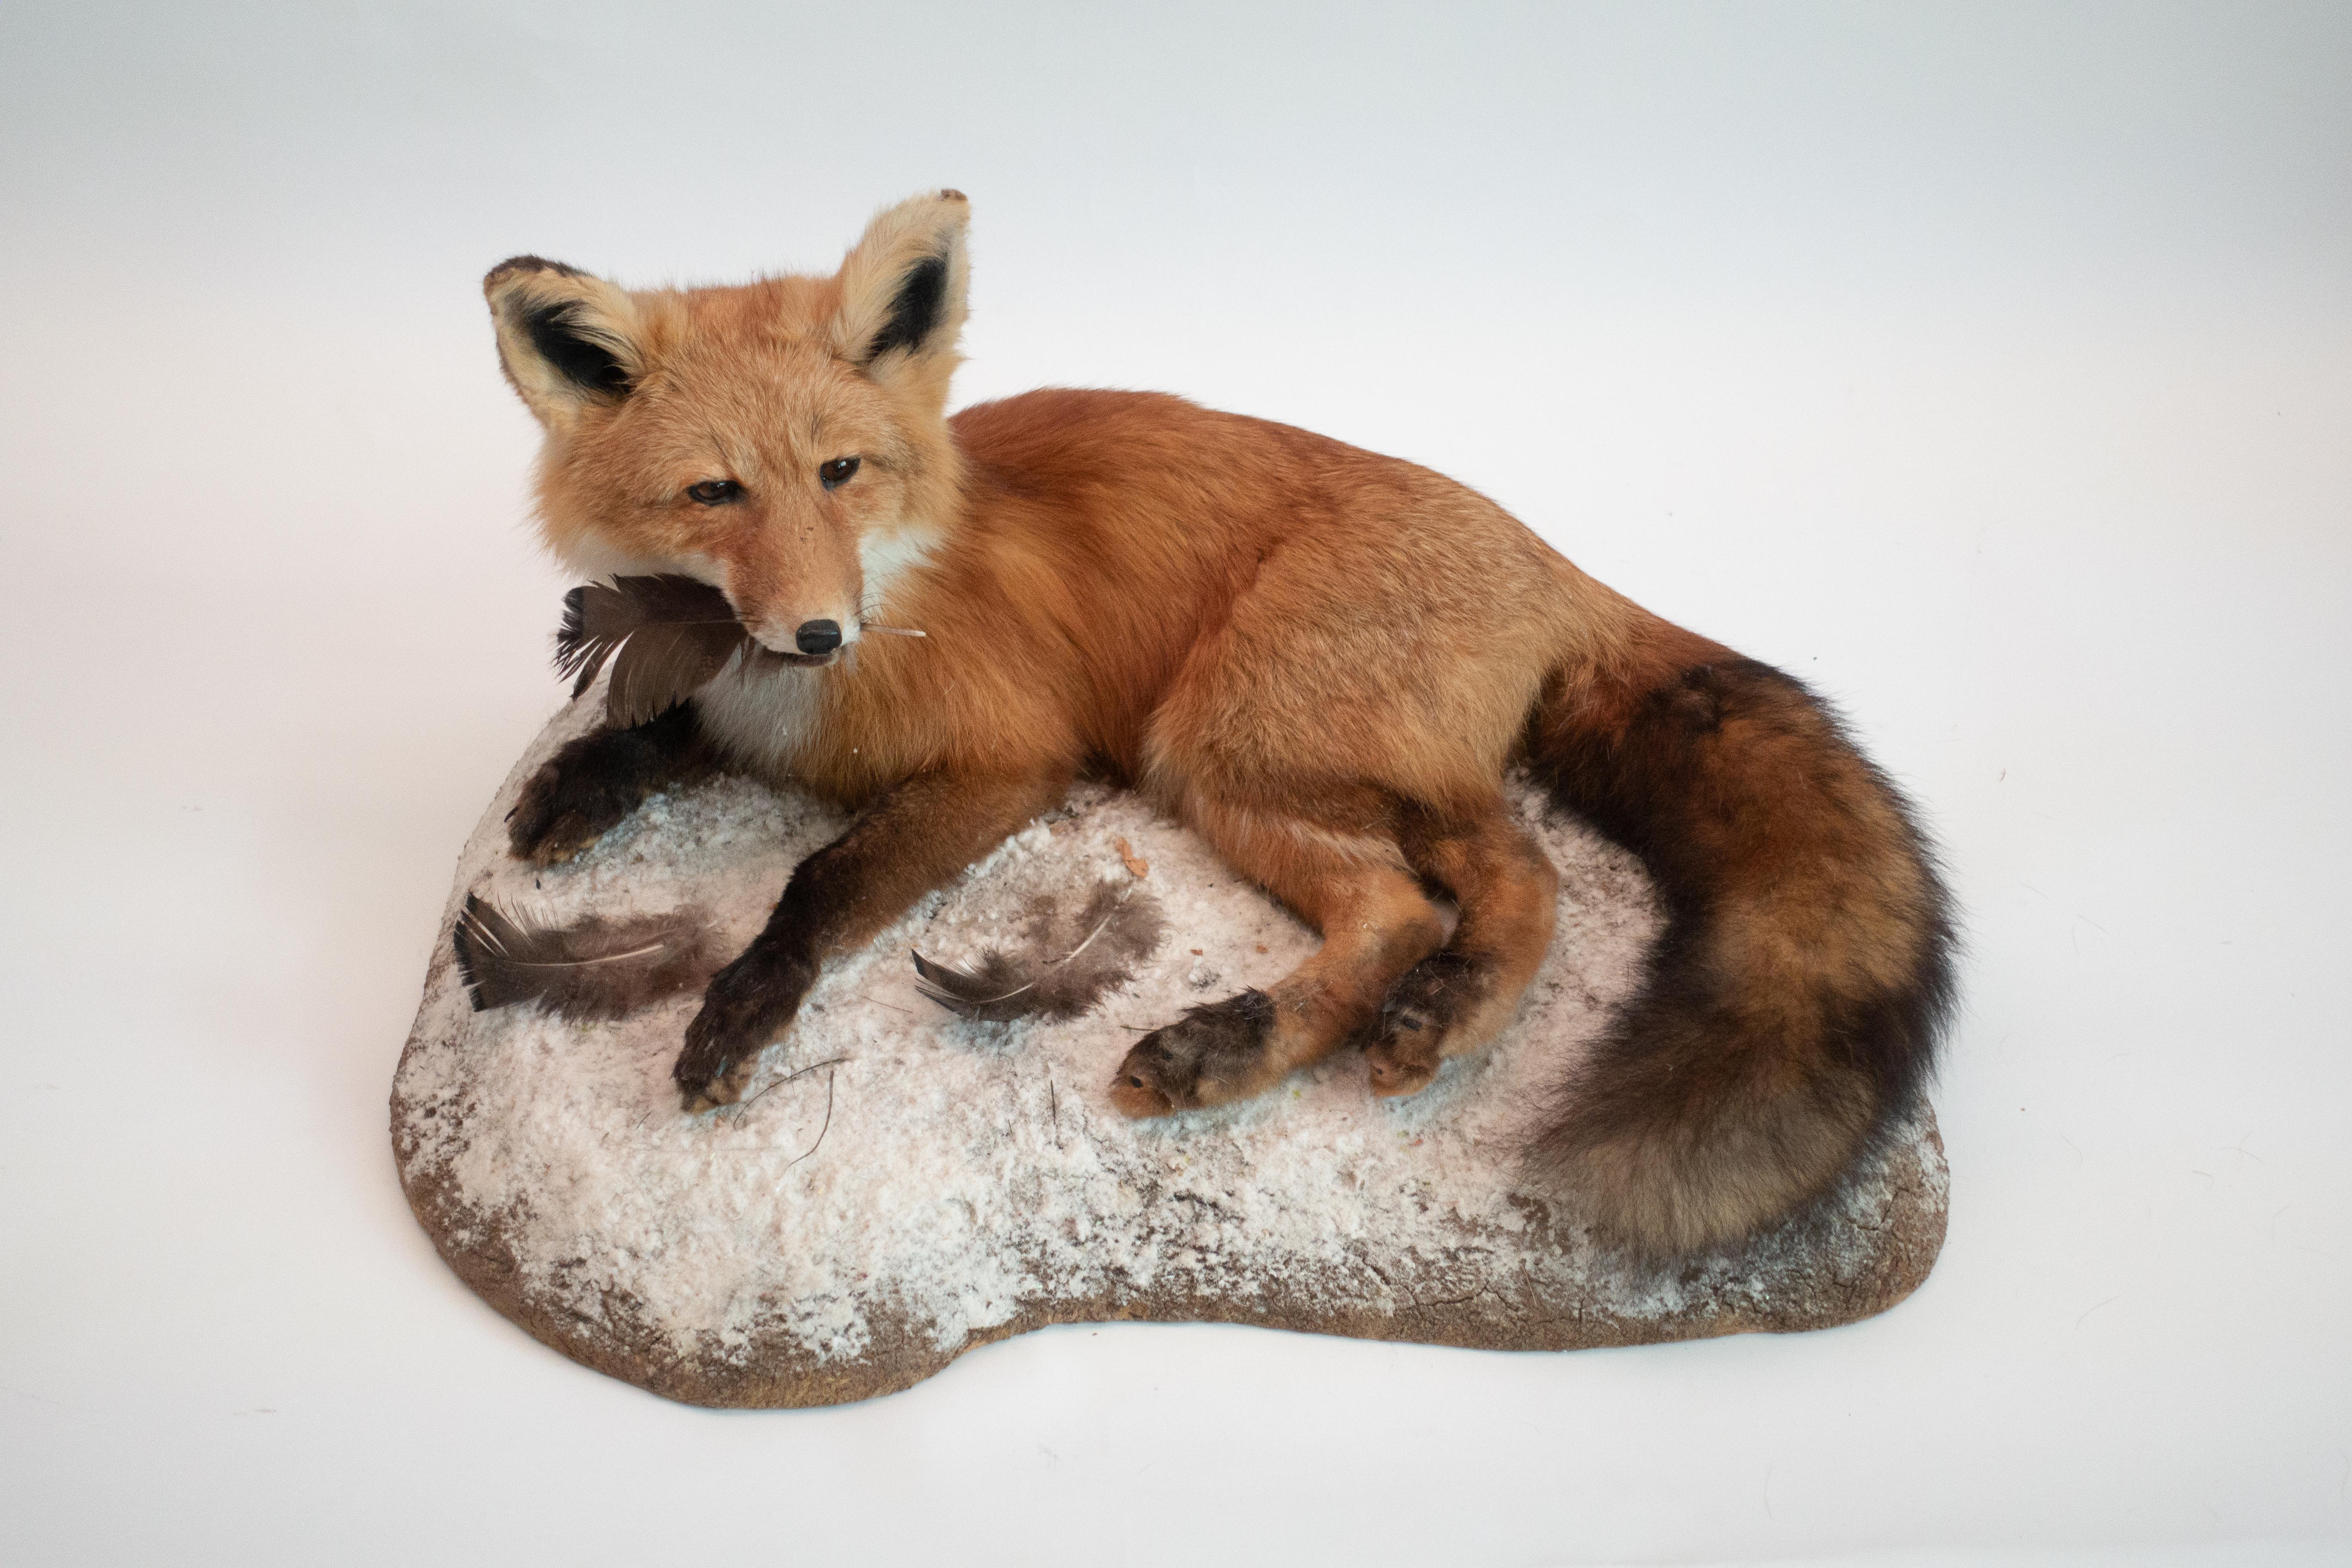 Our reclining Alaskan red fox taxidermy specimen makes a great addition to any collection. The red fox belongs to the same Canidae family as the dog, coyote, and wolf. It is distinctive for its coat of long lustrous fur, and its relatively large and